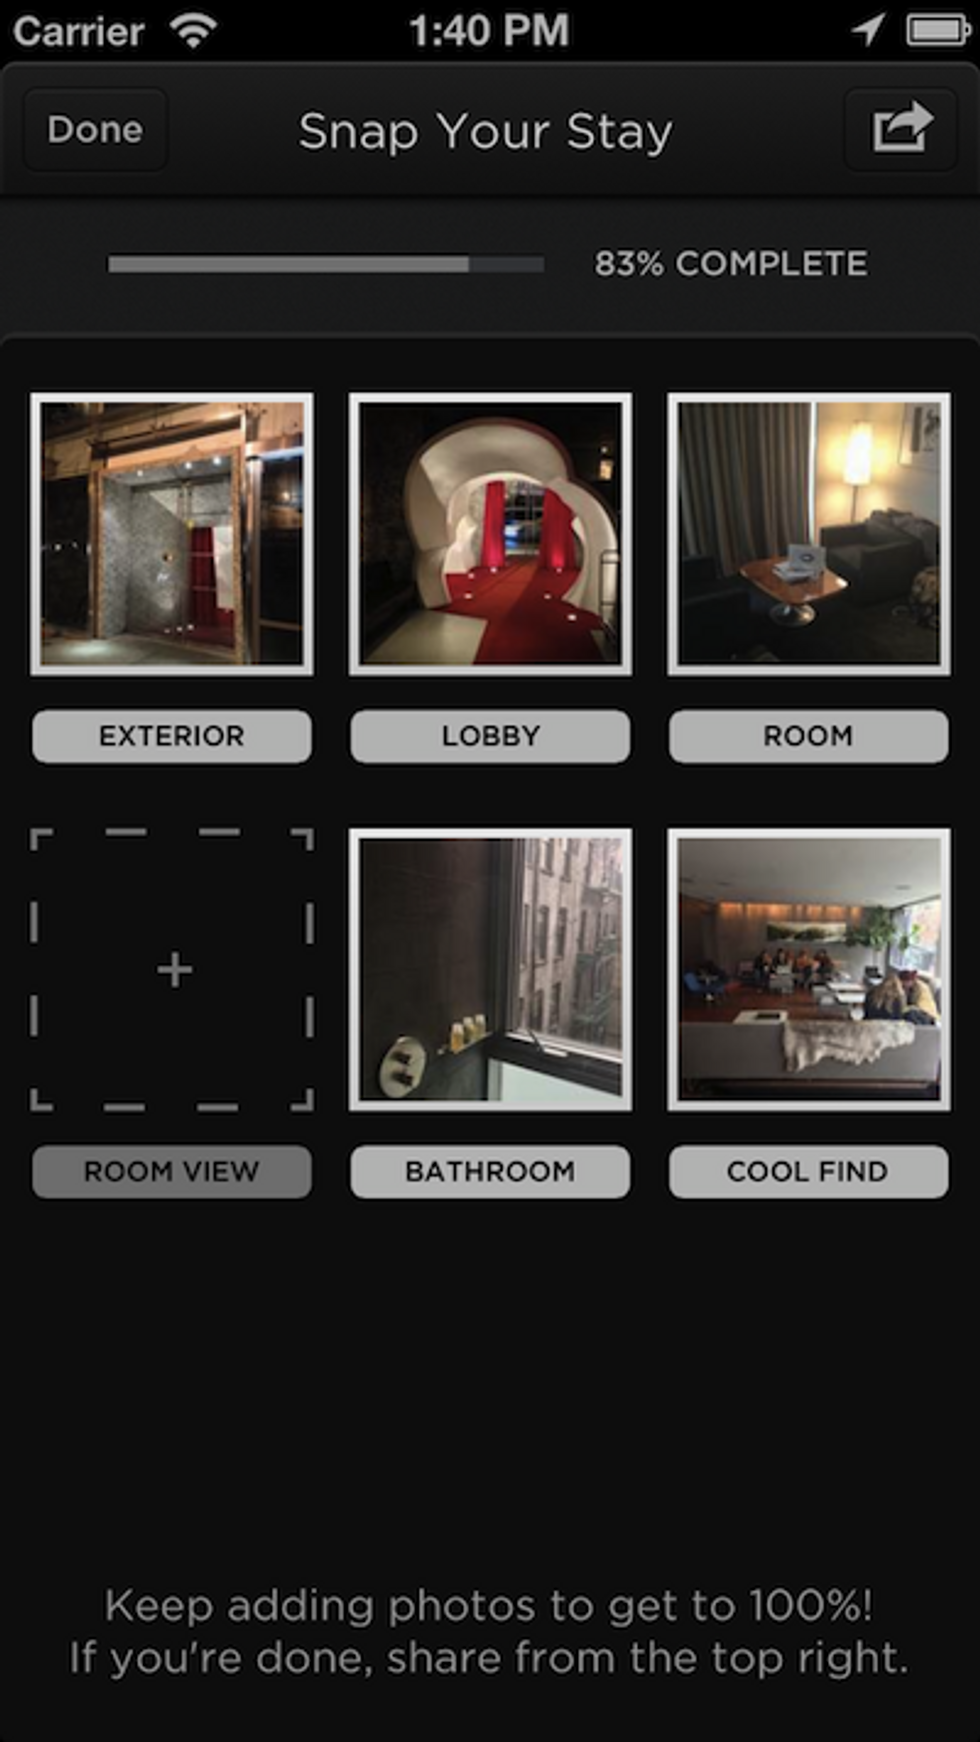 Hotel Tonight Adds Photo Feature to See Rooms Before You Stay